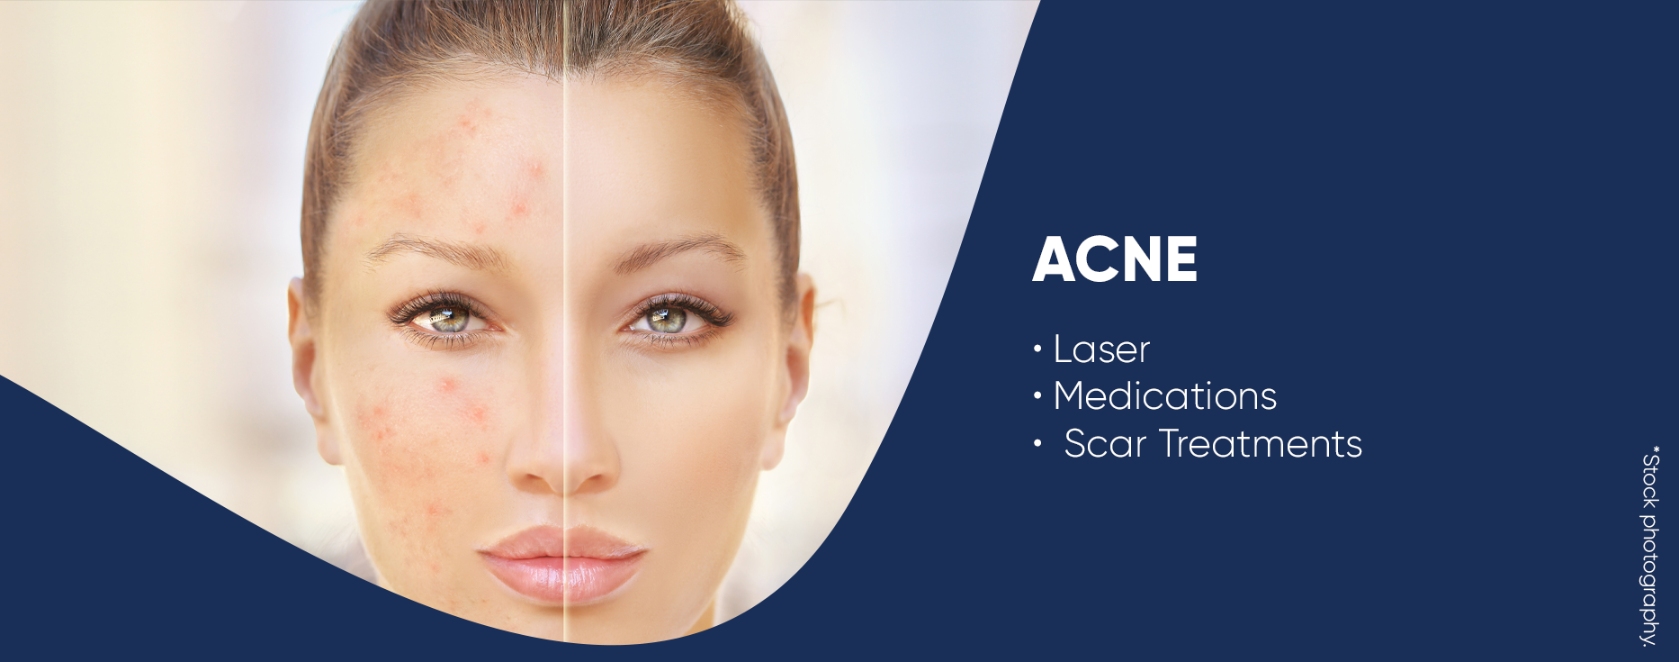 acne conditions and treatments banner